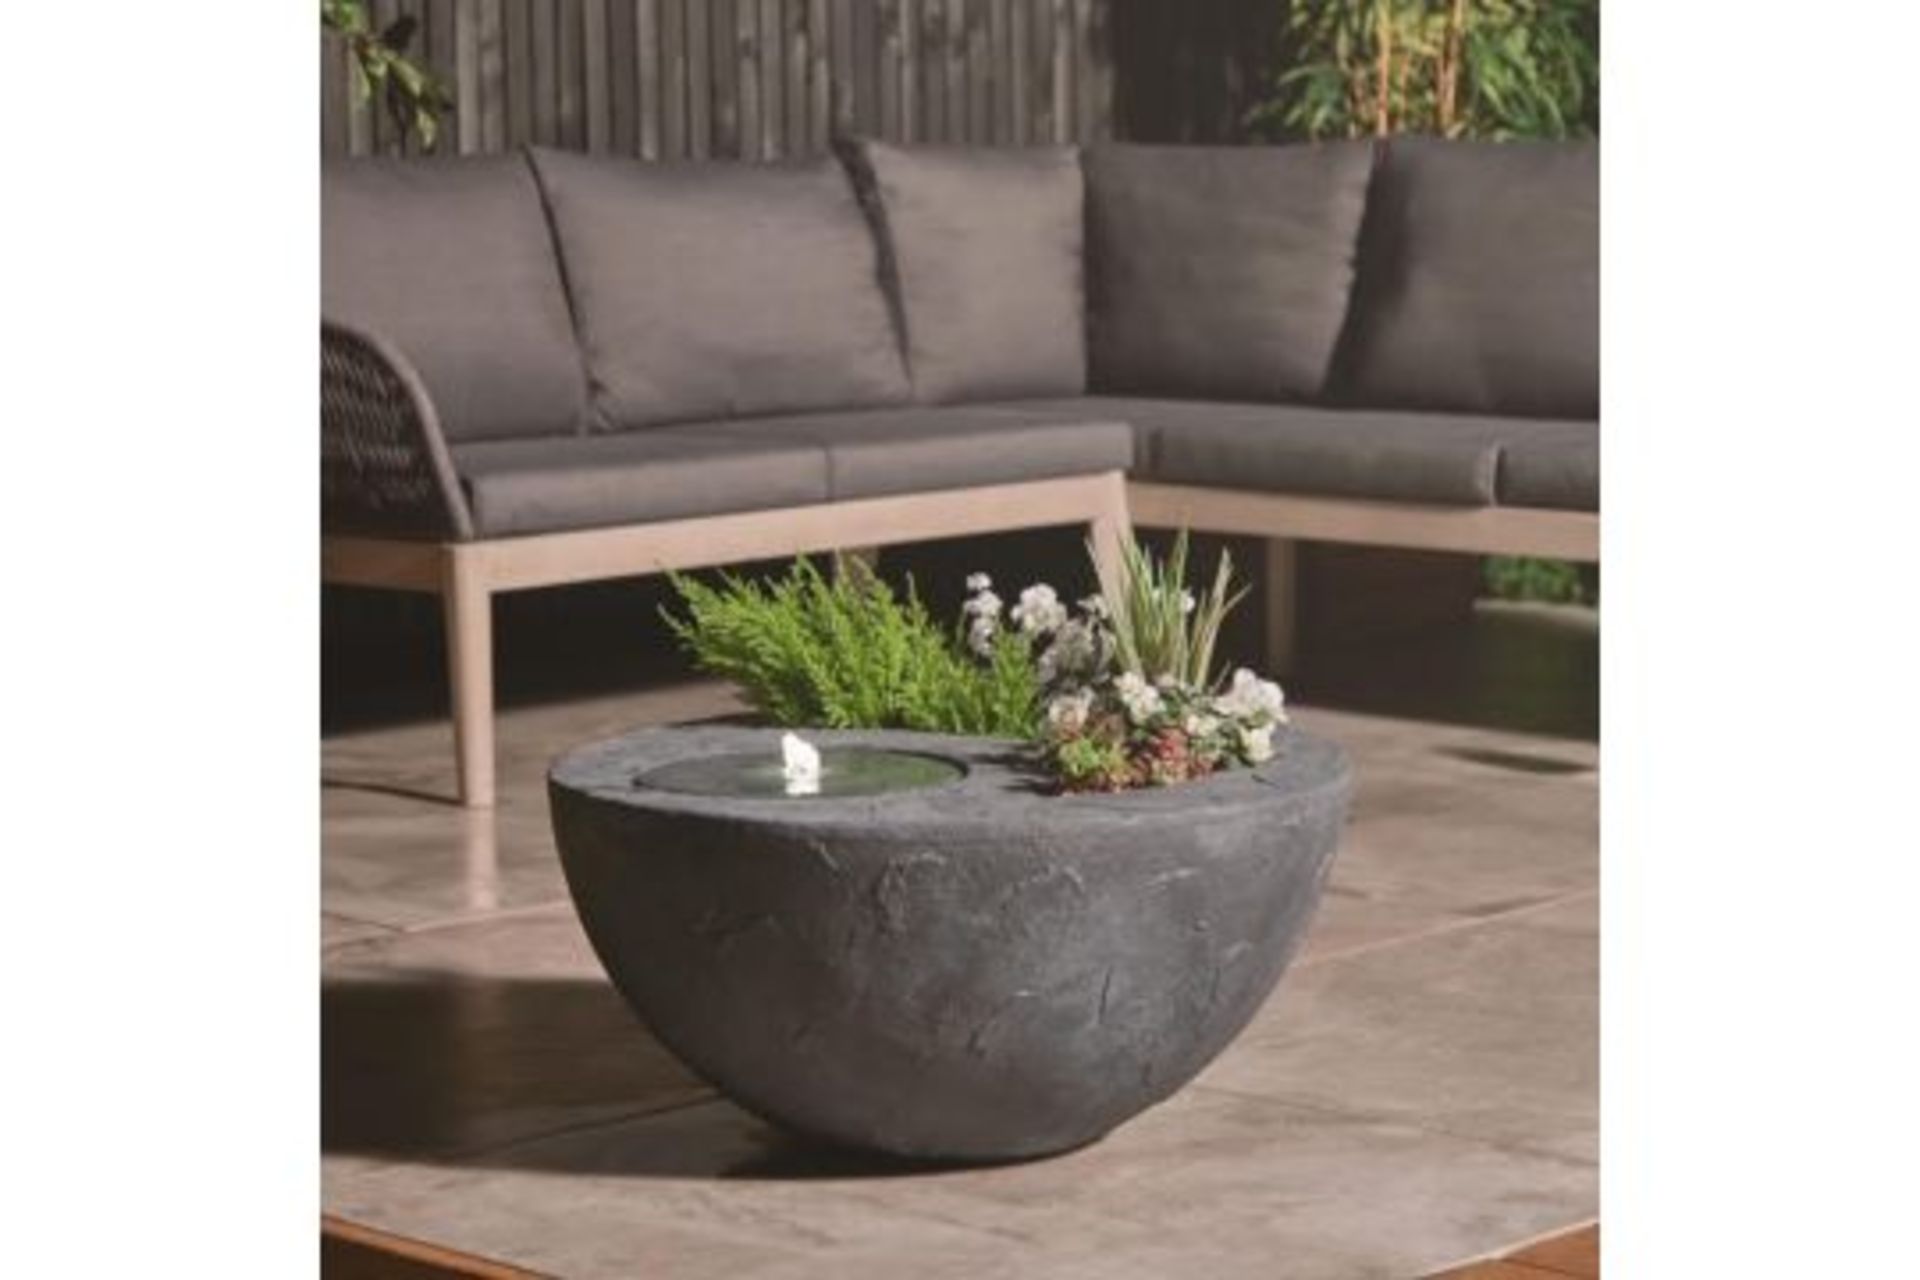 PALLET TO CONTAIN 4 x New & Boxed Dual Water Feature and Planter. RRP £299.99 EACH (REF726) - Garden - Image 3 of 6